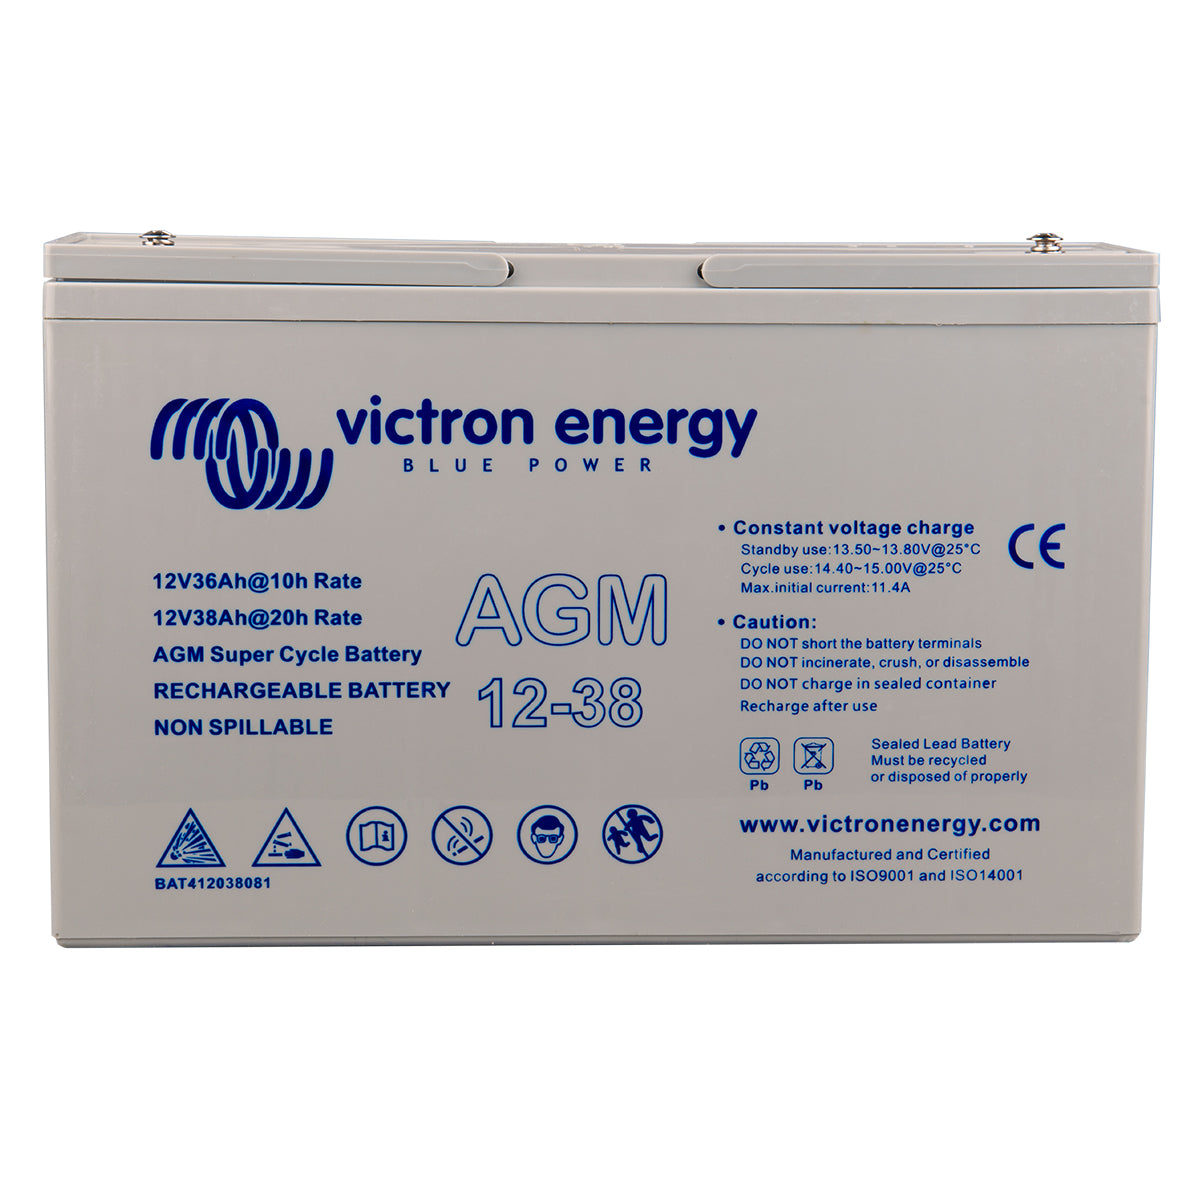 Victron Energy 12V/38Ah AGM Super Cycle Battery